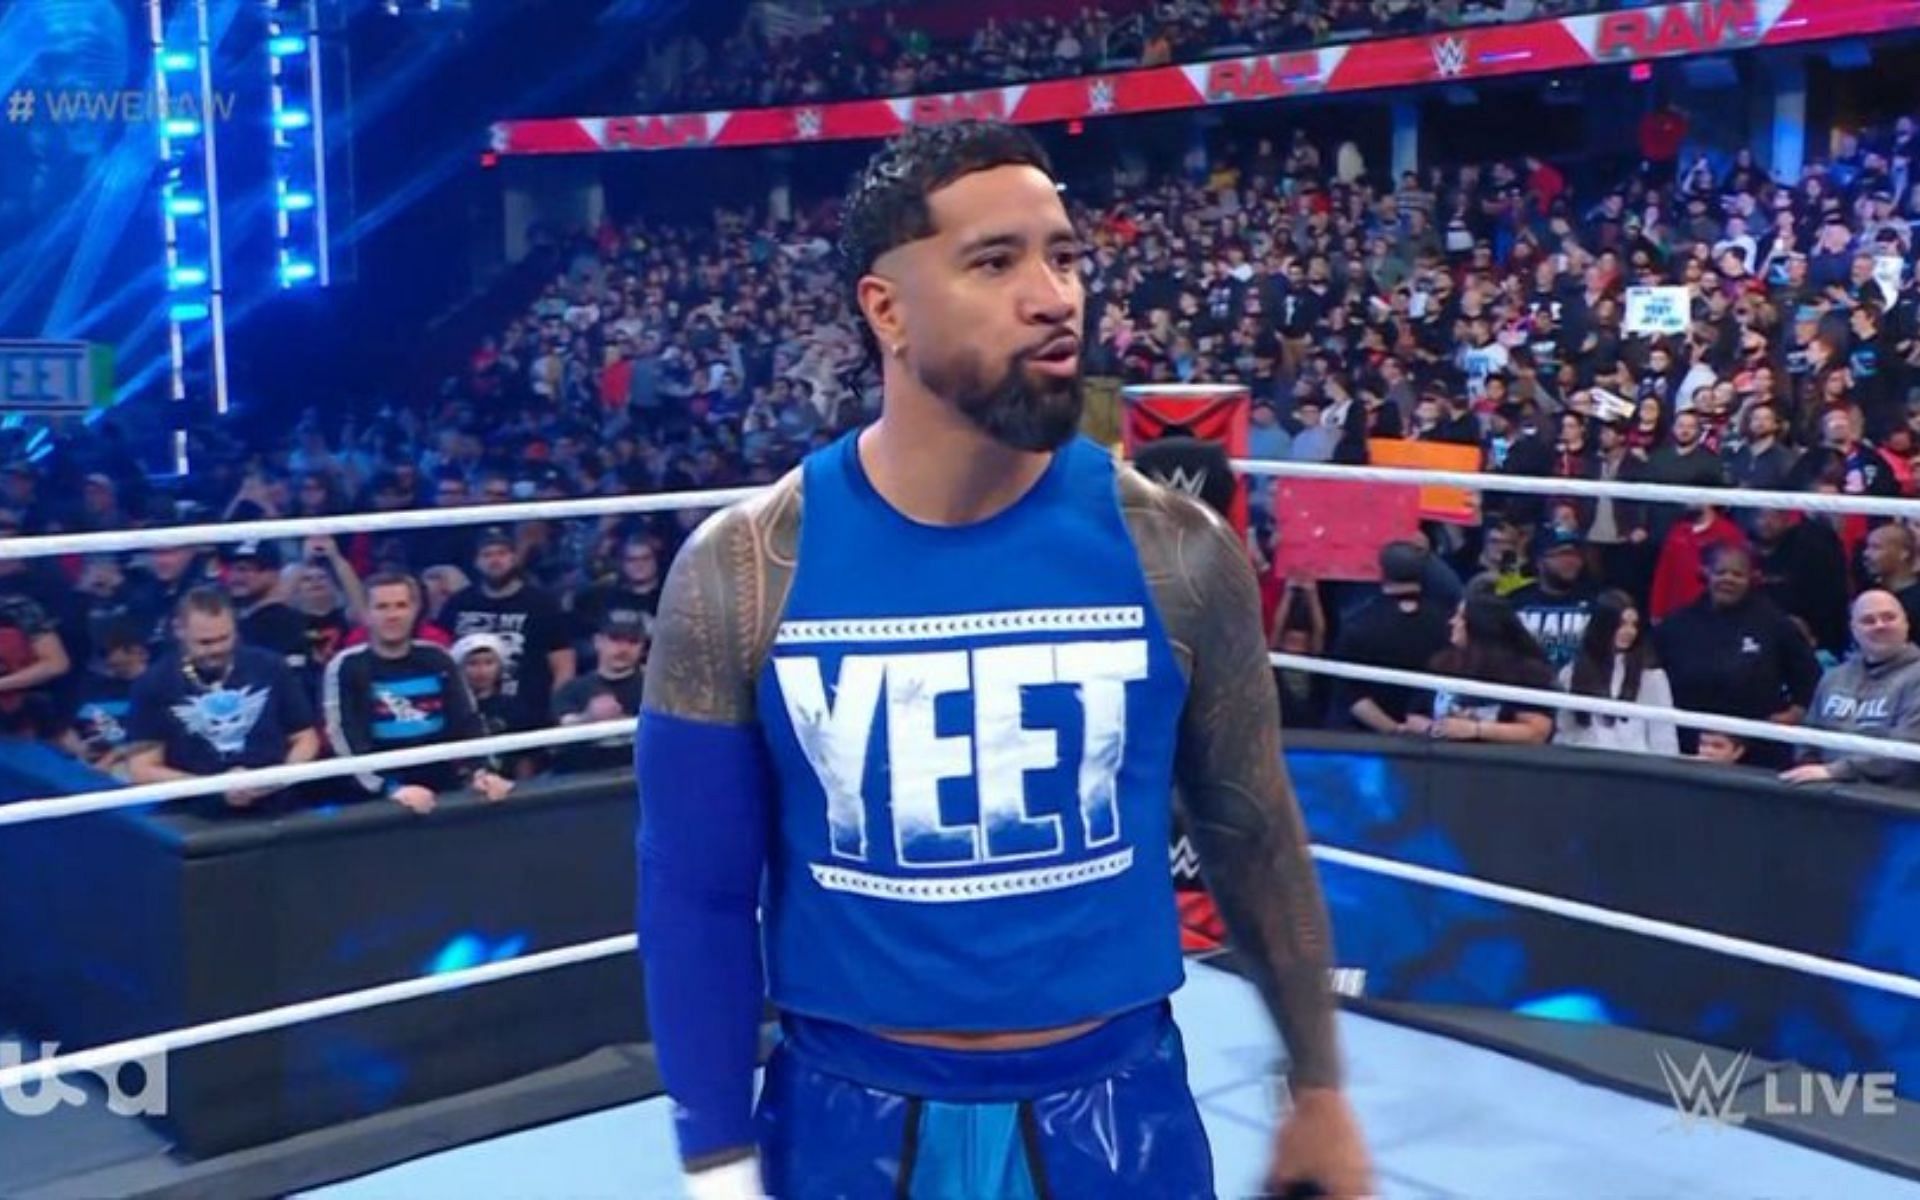 No &quot;Yeet&quot; for Jey on this episode of RAW